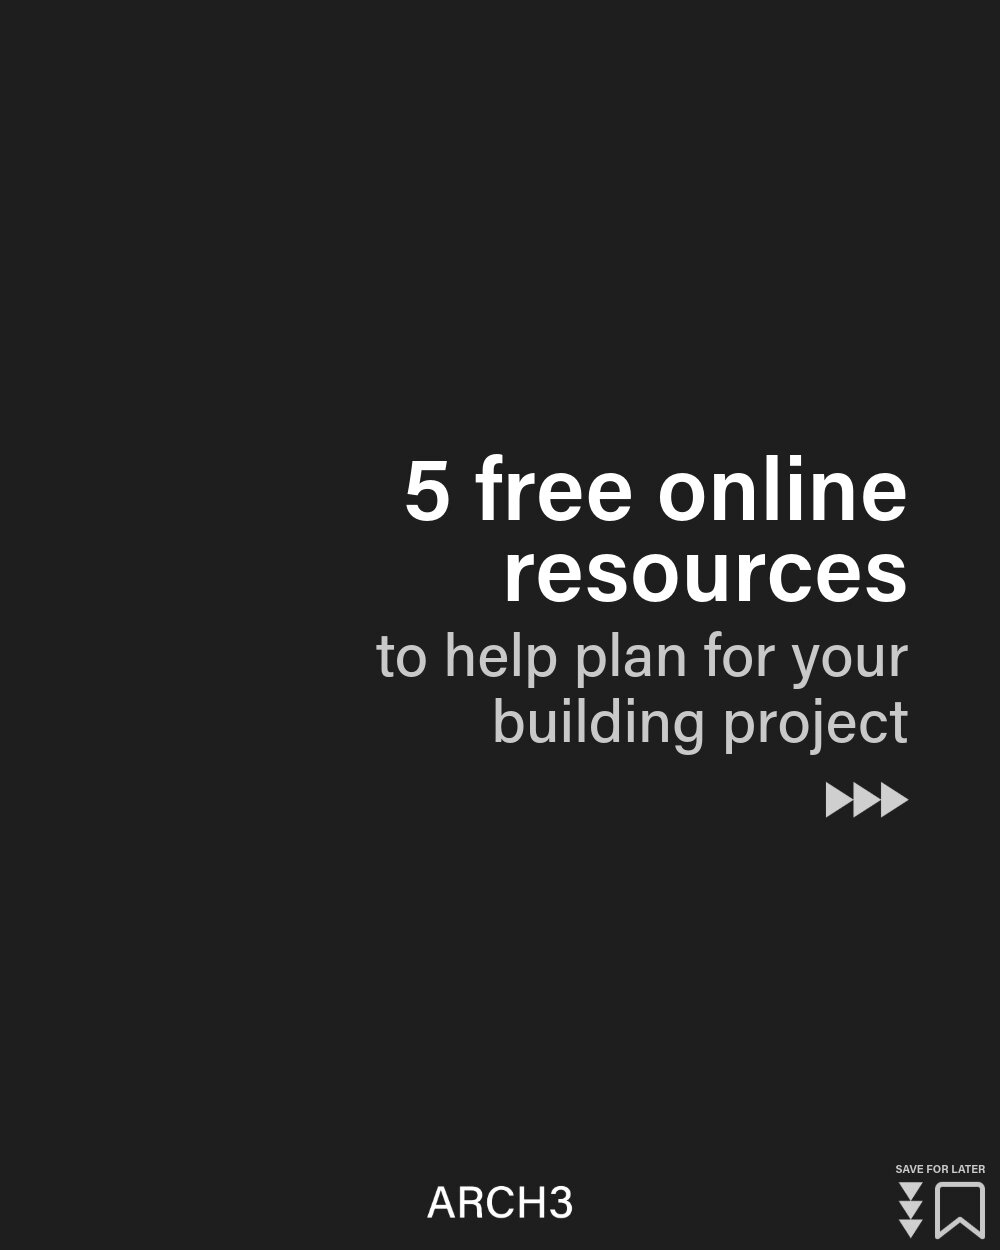 Planning a building project? Here are five free resources to help:
- Landchecker: Simplify property research.
- YourHome: Learn about passive design.
- Building Costs: Understand construction expenses.
- Pinterest: Find inspiration for your project.
